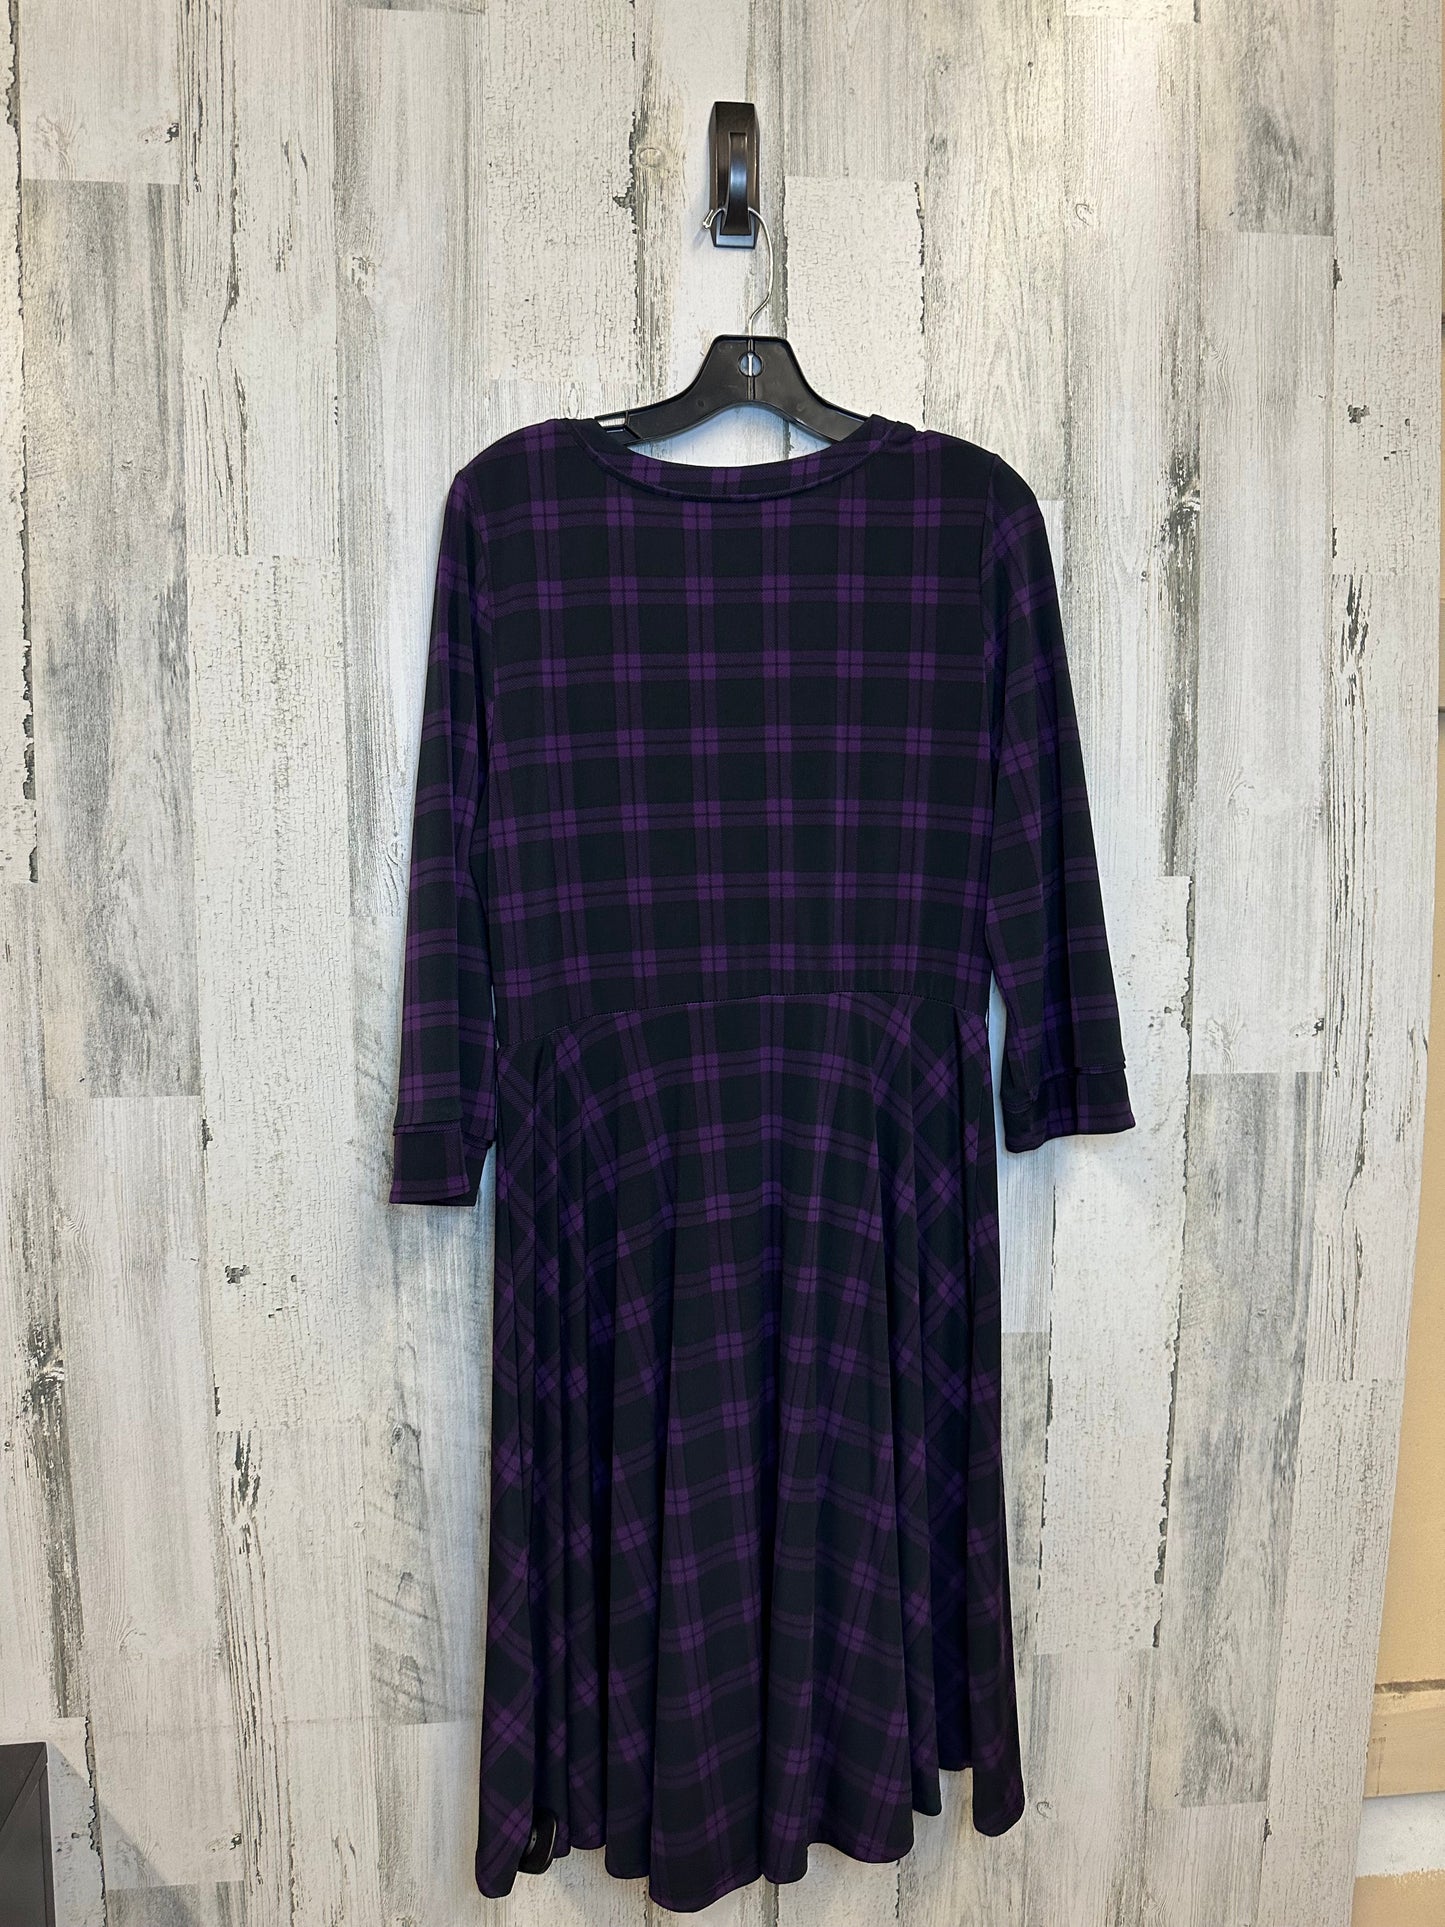 Dress Casual Short By Torrid  Size: 1x